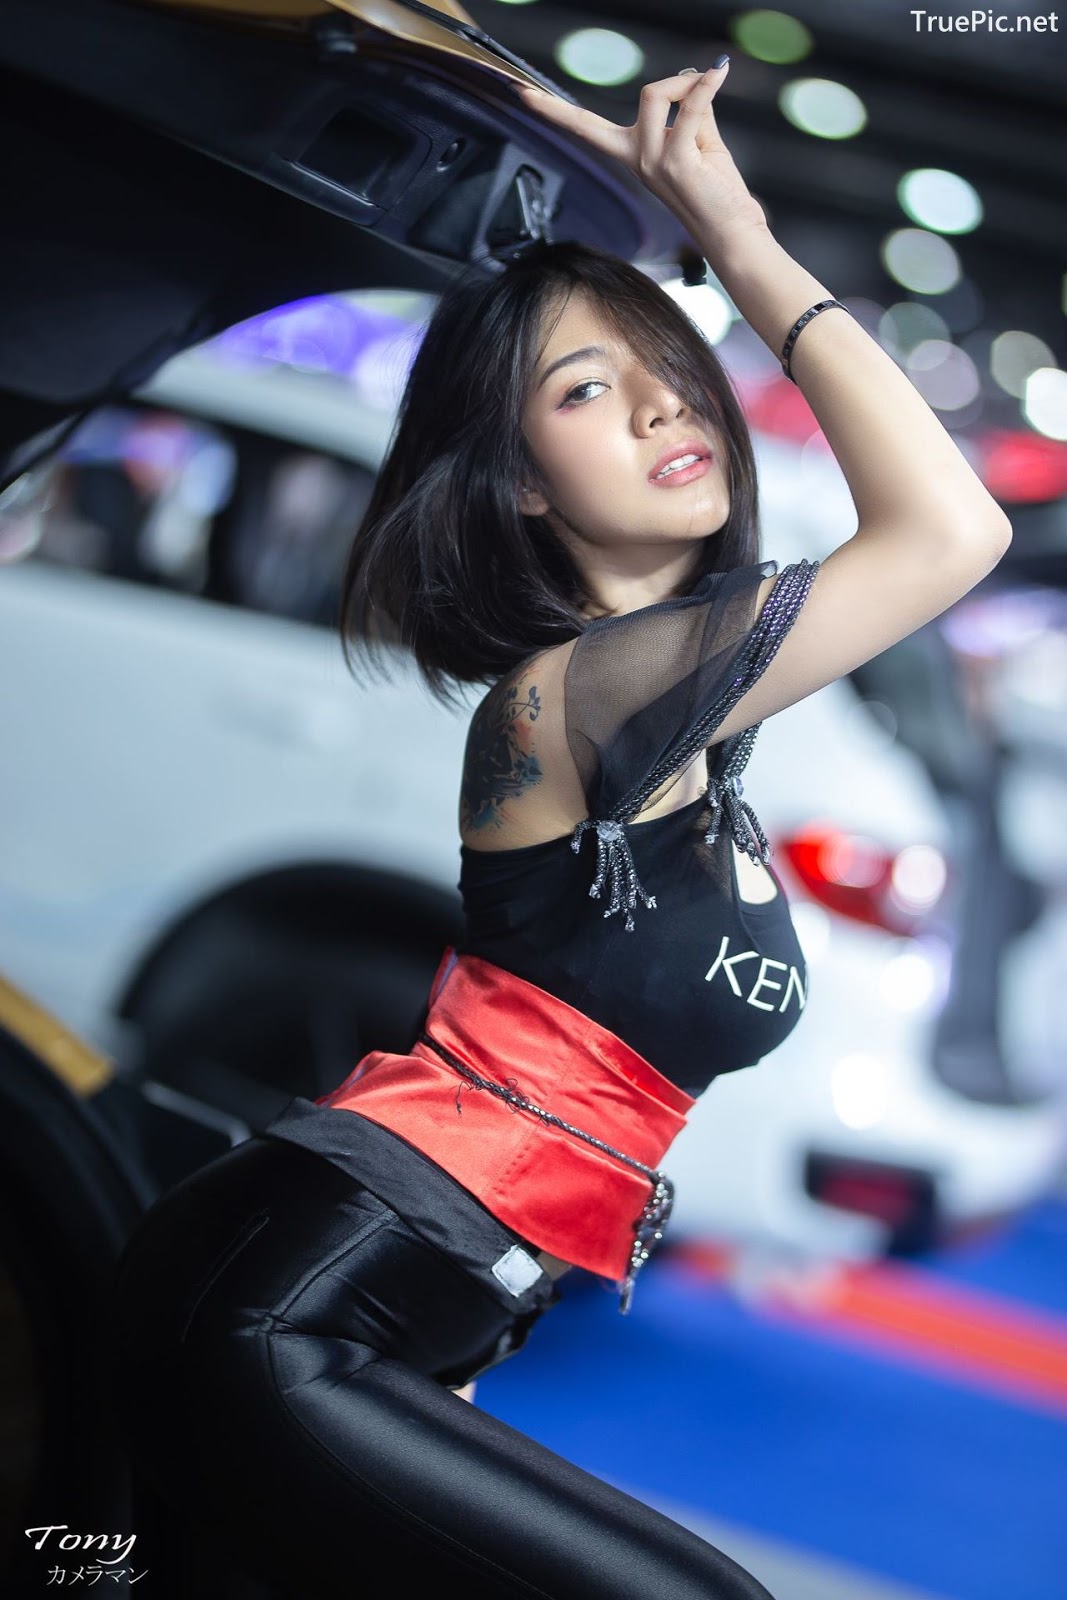 Image-Thailand-Hot-Model-Thai-Racing-Girl-At-Motor-Expo-2018-TruePic.net- Picture-84